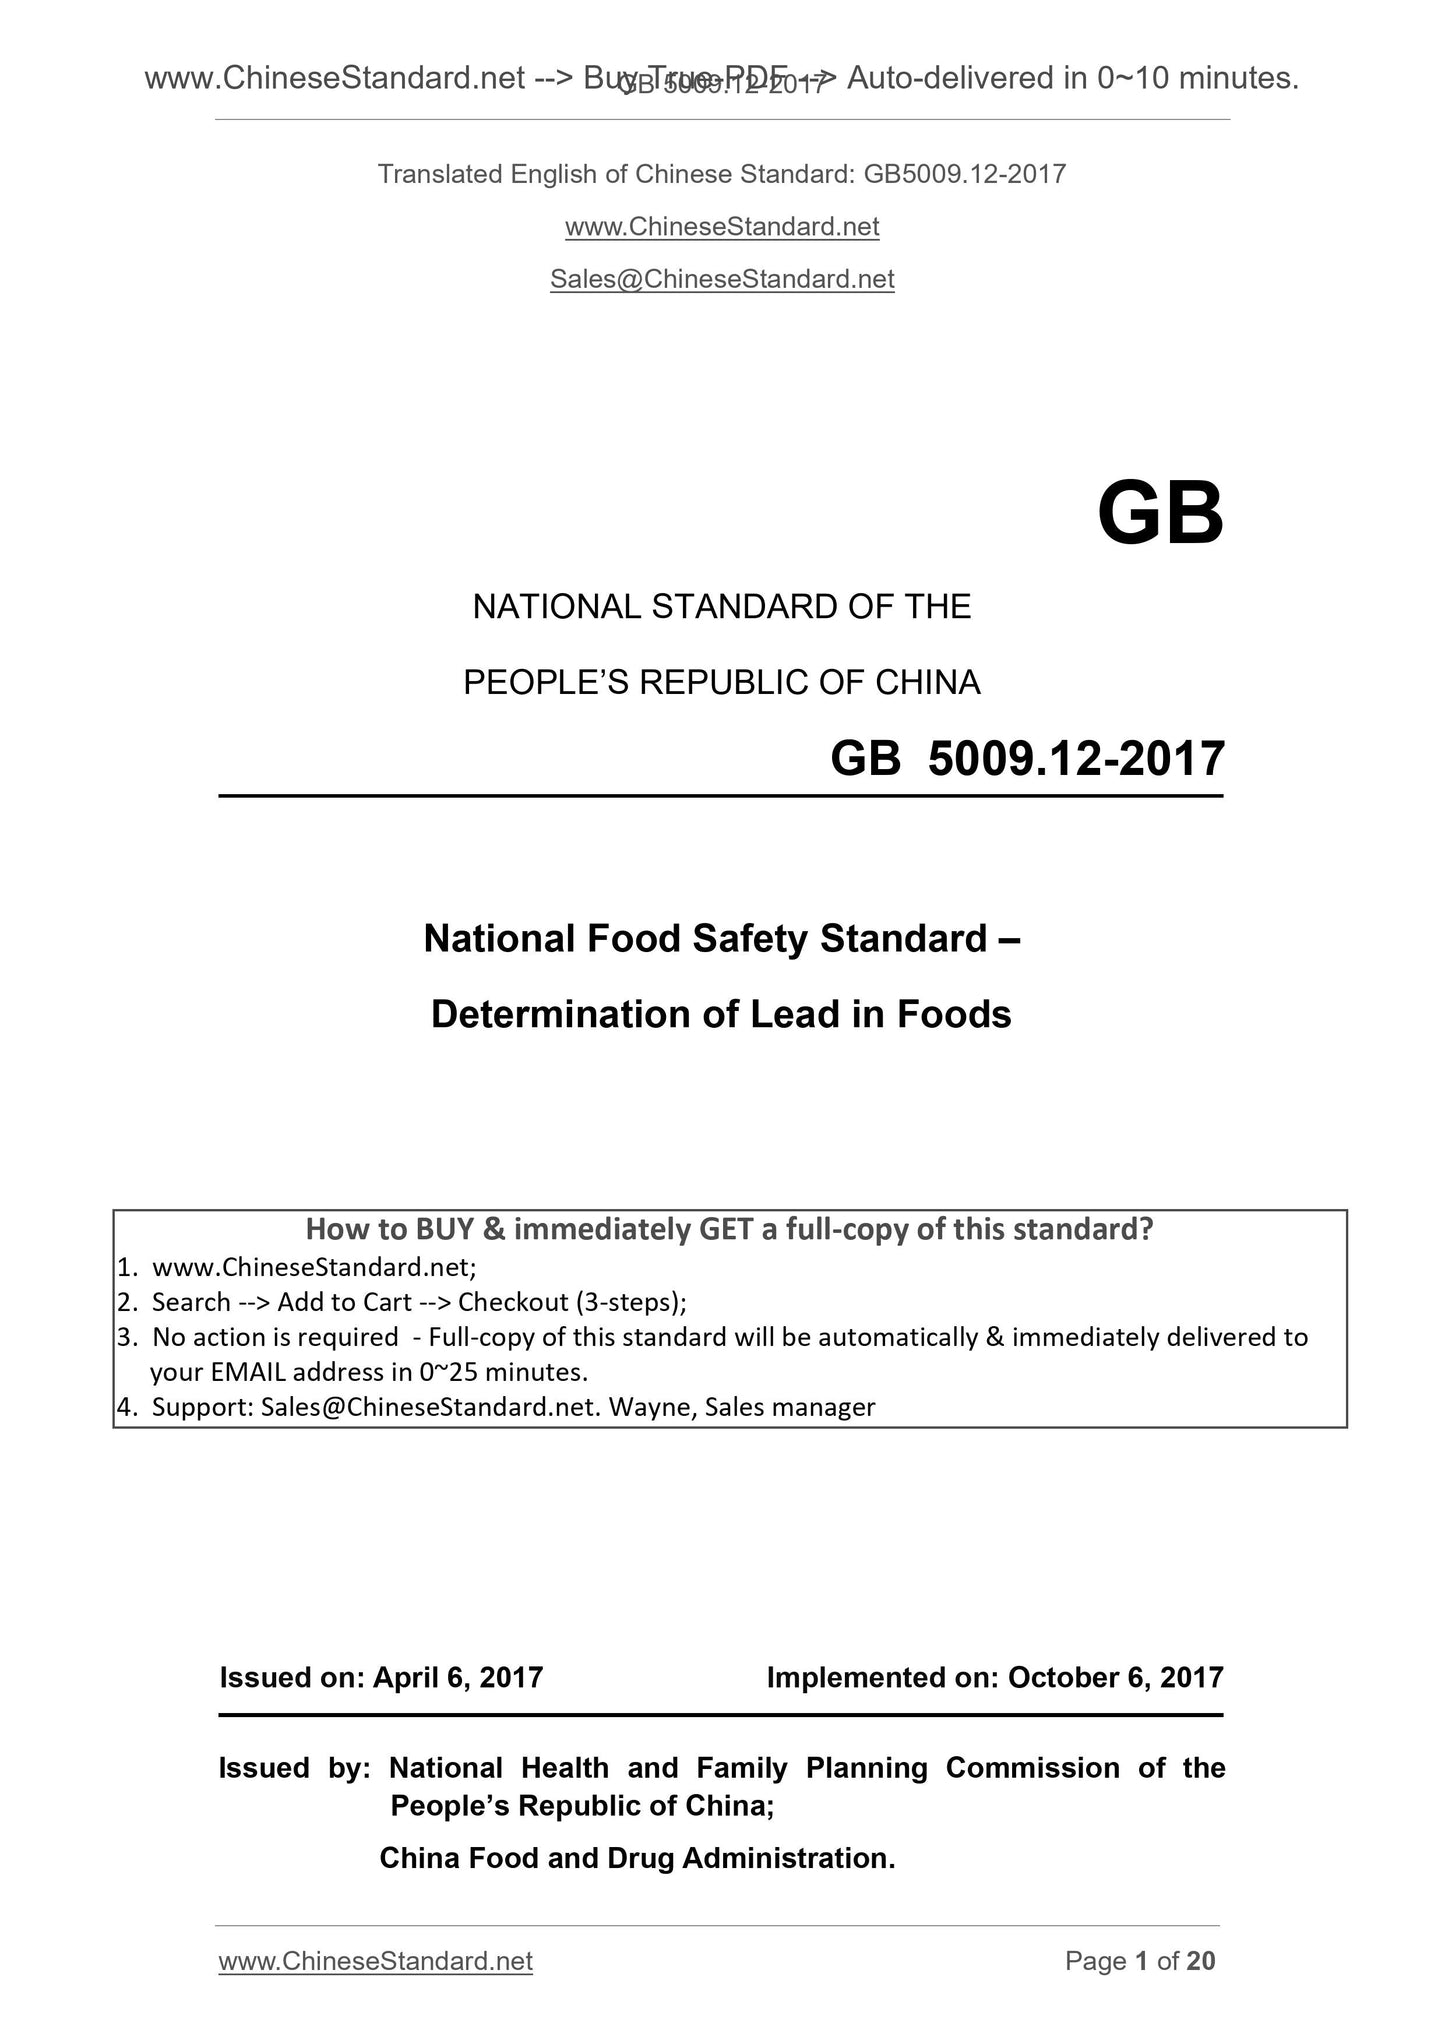 GB 5009.12-2017 Page 1